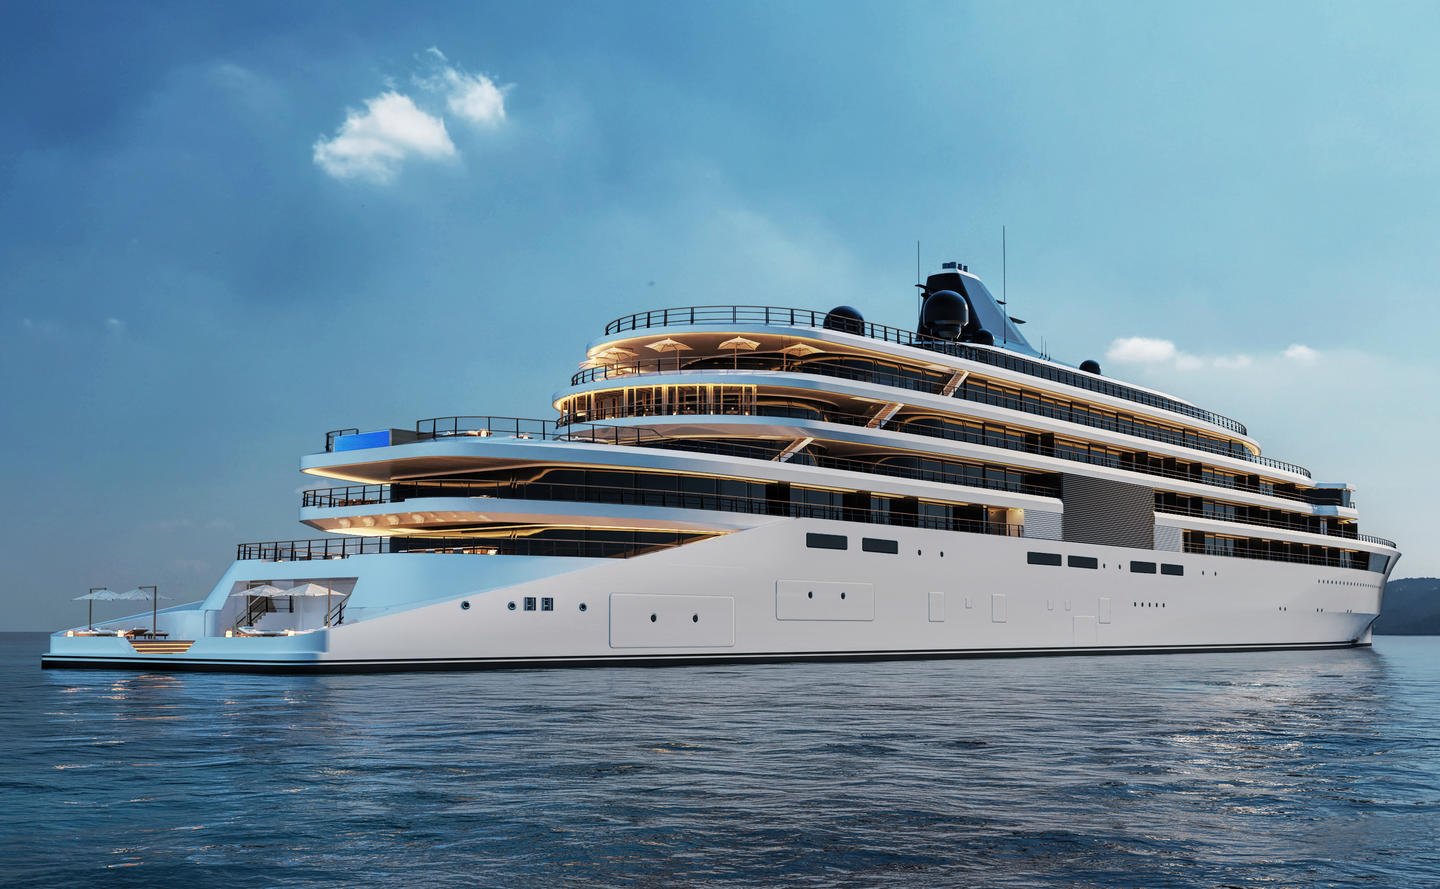 An artist's drawing of a luxury cruise vessel planned for Aman Resorts.